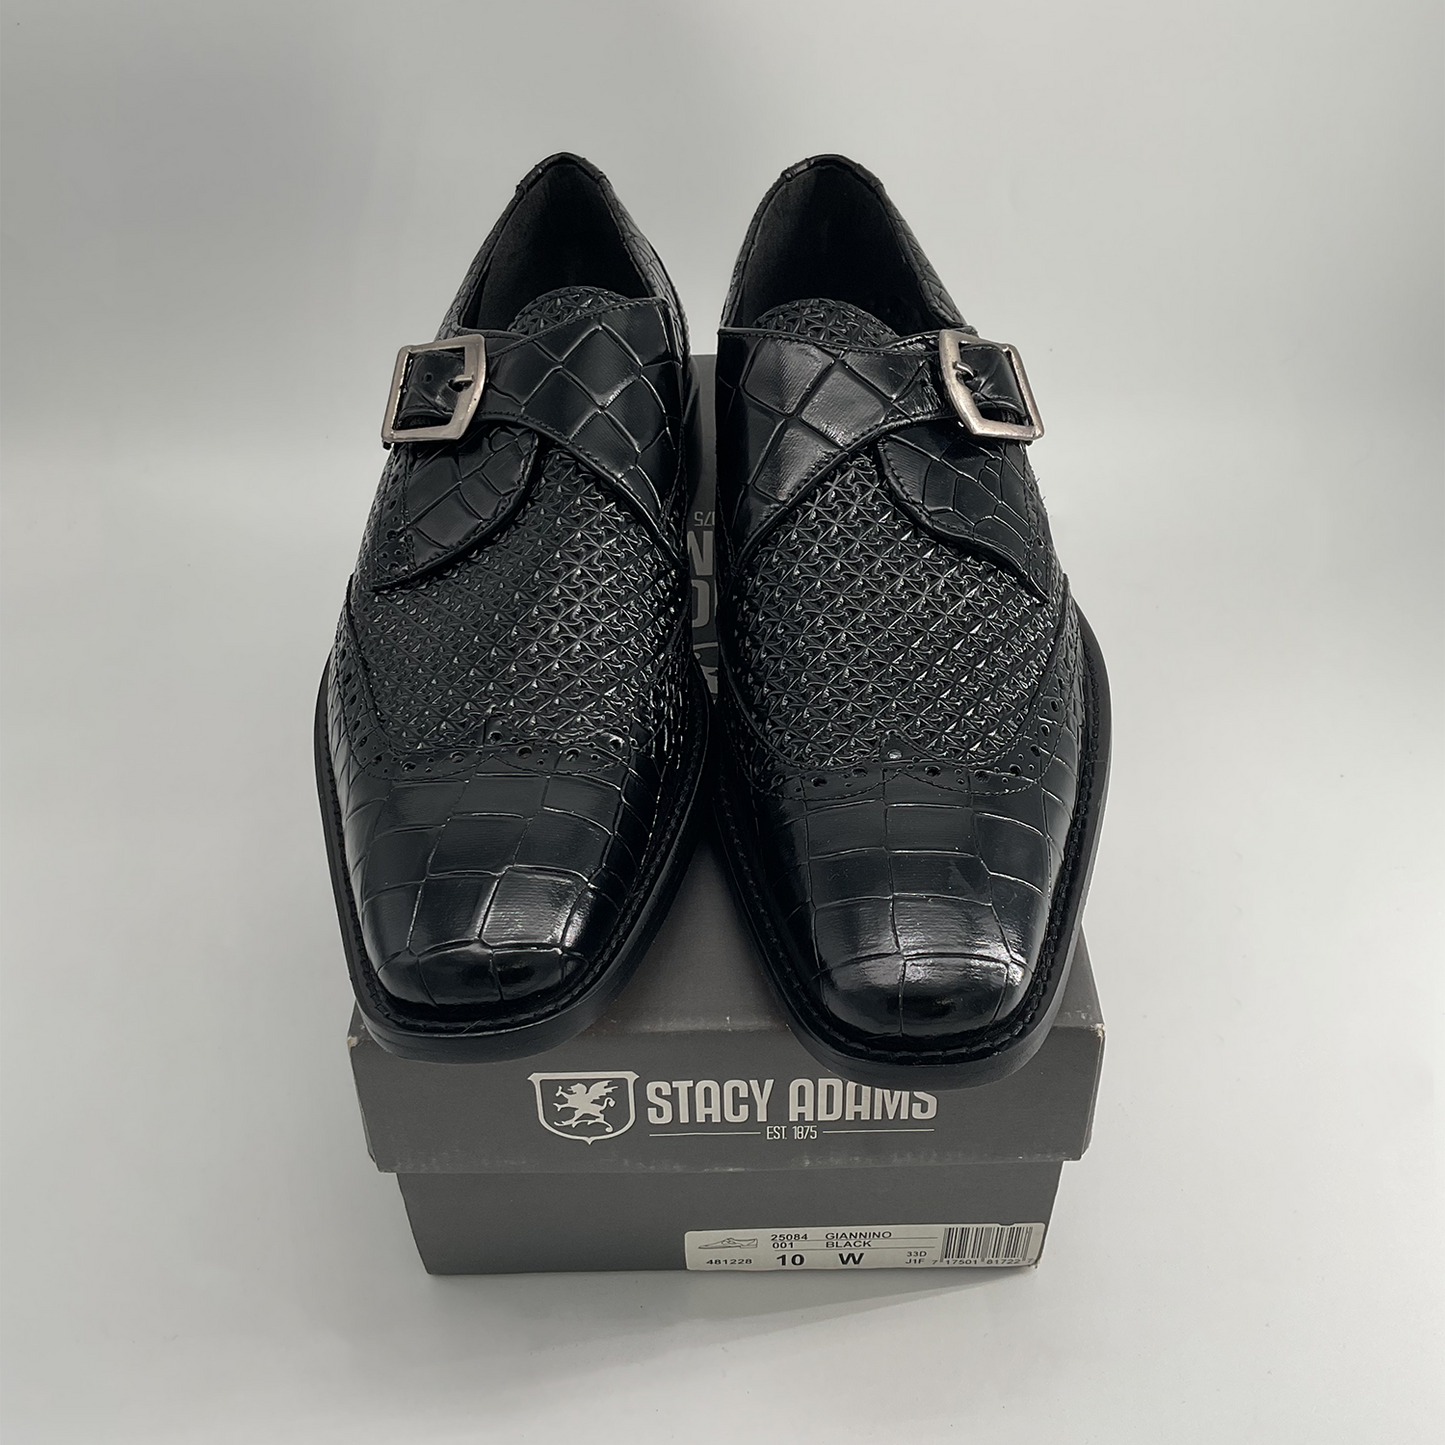 Giannino Black Dress Shoes for Men (Size 10) by Stacy Adams